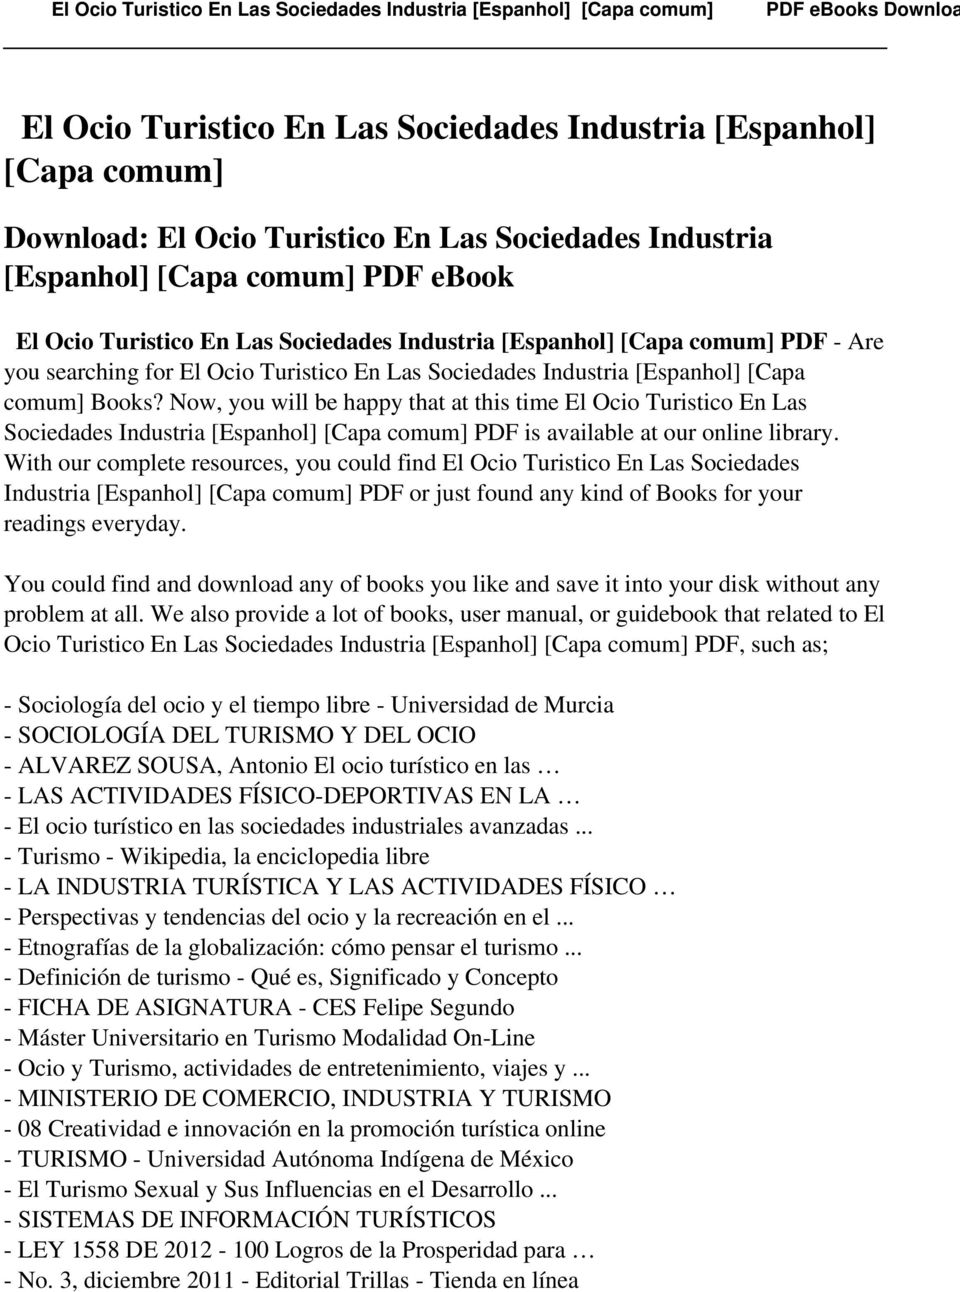 Now, you will be happy that at this time El Ocio Turistico En Las Sociedades Industria [Espanhol] [Capa comum] PDF is available at our online library.